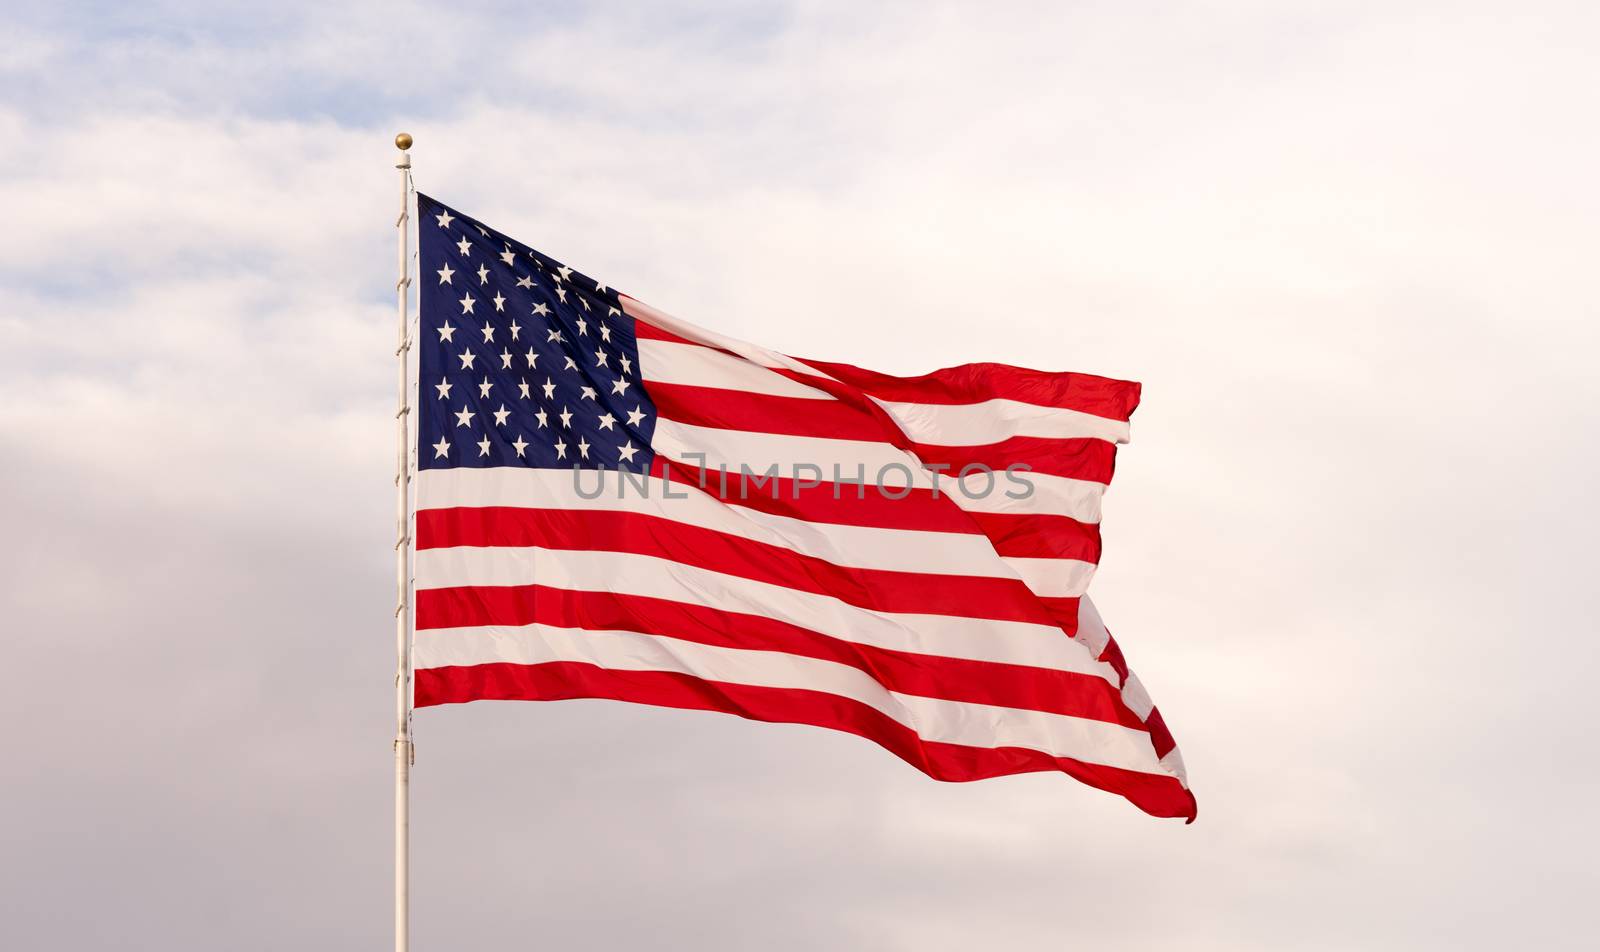 Wind Waving Bright Patriotic American Flag Stars and Stripes  by ChrisBoswell